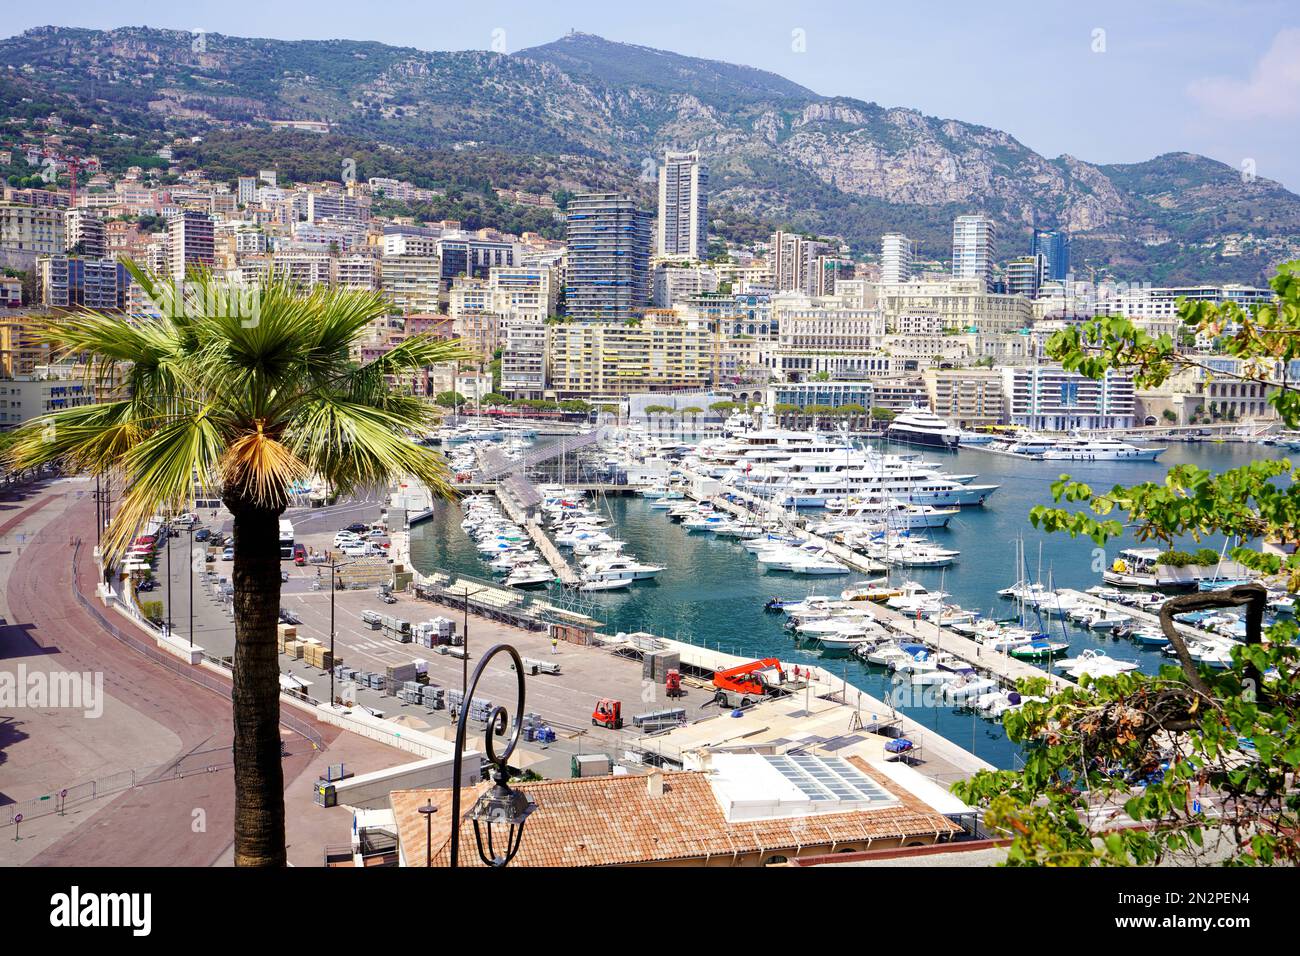 Spectacular aerial panoramic view of Monte Carlo with Marina and Cityscape, Monaco, Europe Stock Photo